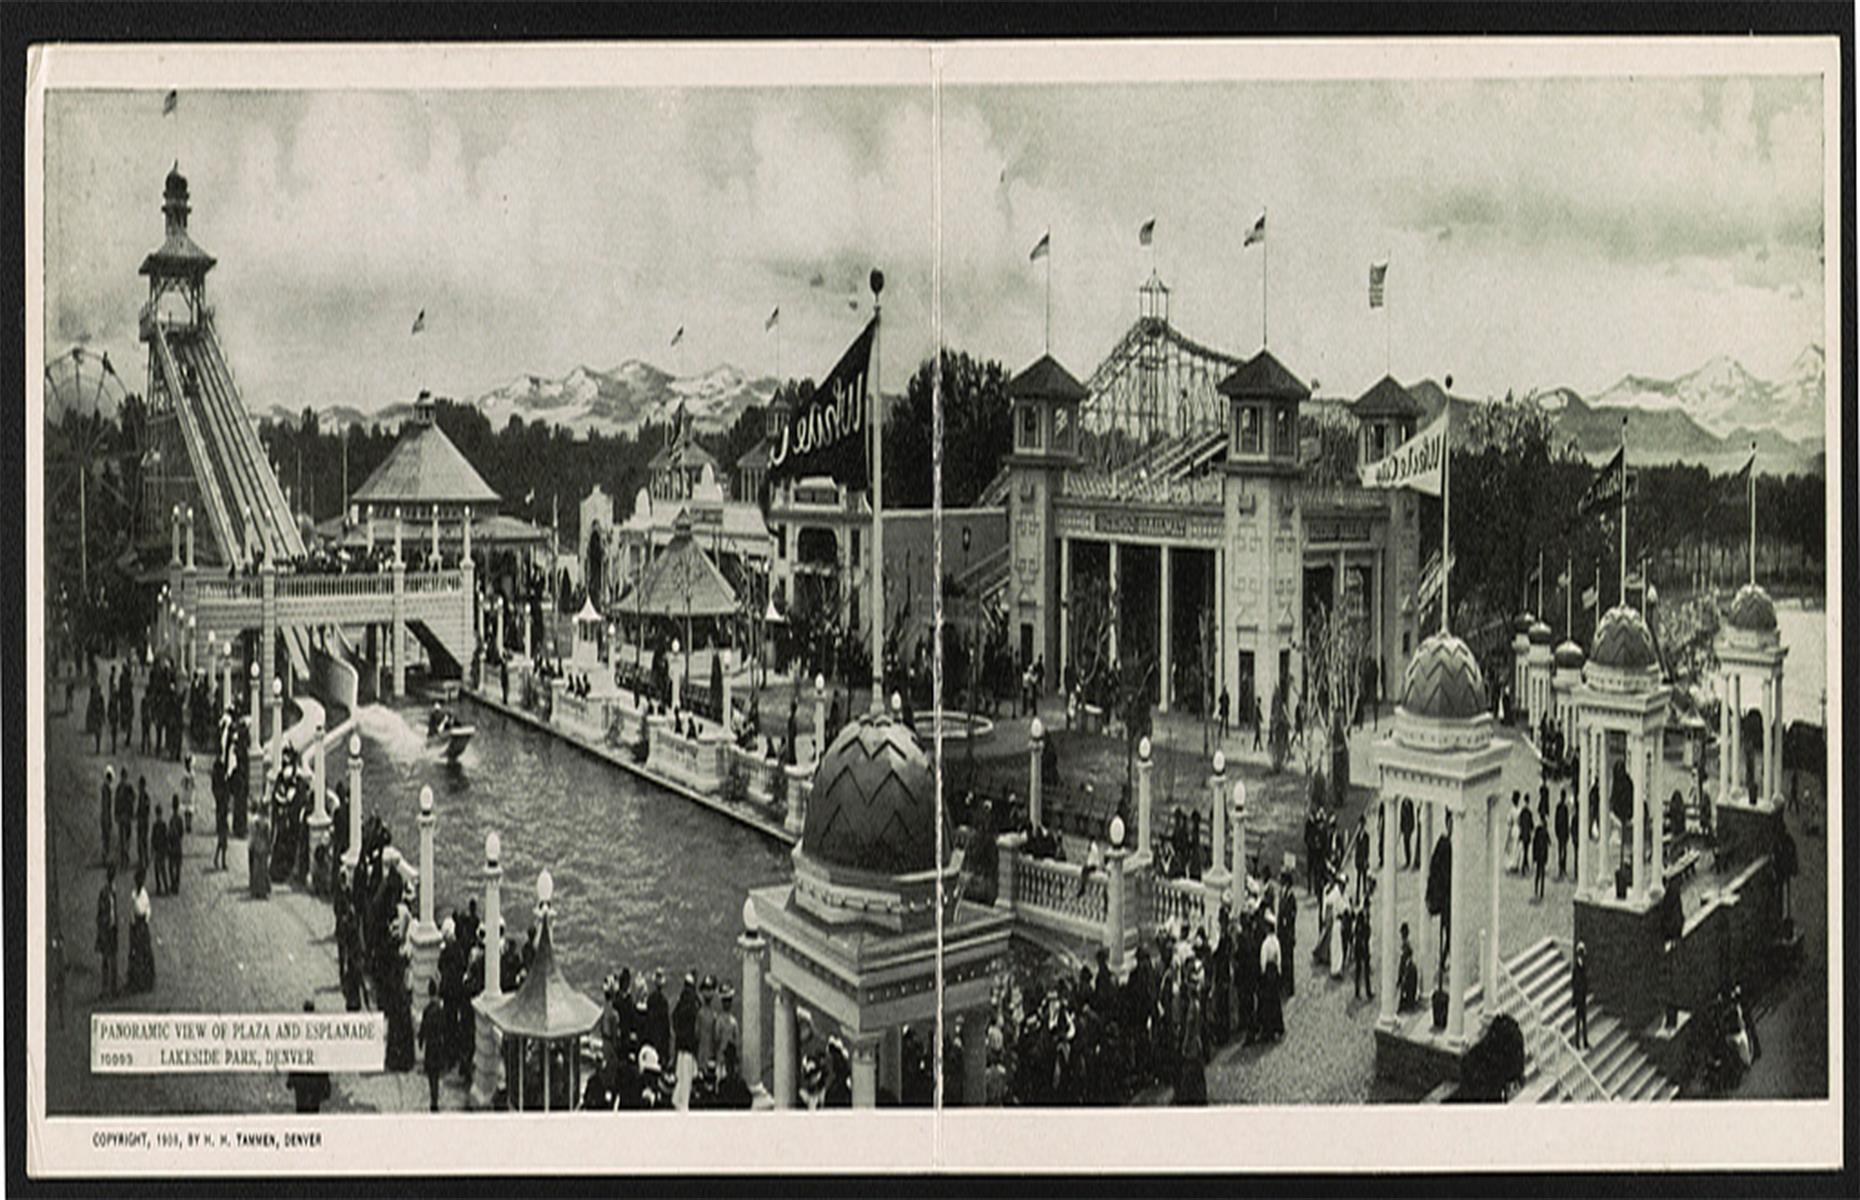 <p>The 1900s was a decade that saw a surge in the popularity of amusement parks. Lakeside, a small town near Denver, has one of the country’s oldest. Originally called White City, the park opened next to Lake Rhoda in 1908 to a crowd of 50,000 people. It had a swimming beach, casino, theater, racetrack and public pool as well as traditional fairground rides. Lakeside Amusement Park is still in operation today. Discover <a href="https://www.loveexploring.com/galleries/77151/inside-americas-abandoned-theme-parks">US theme parks that didn't go the distance and are now abandoned here</a>.</p>